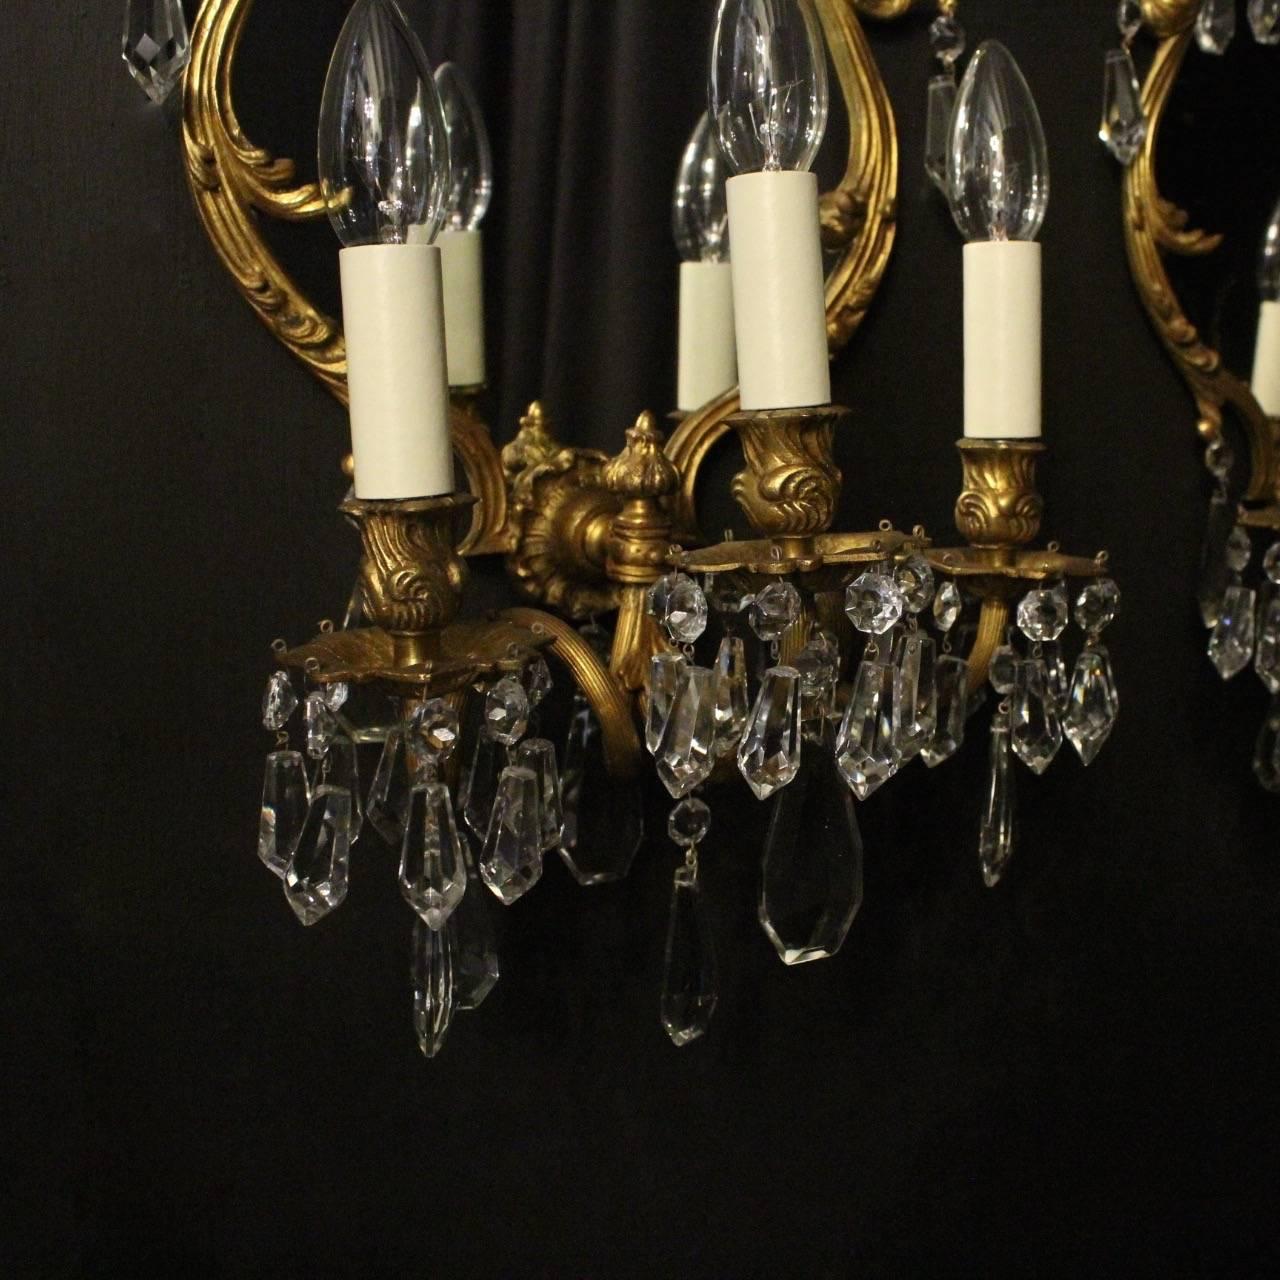 An ornate Italian pair of gilded cast bronze triple arm antique girandoles, the reeded scrolling arms with leaf bobeche drip pans and bulbous candle sconces, issuing from an ornately cast cartouche shaped mirrored backplate with central leaf motif